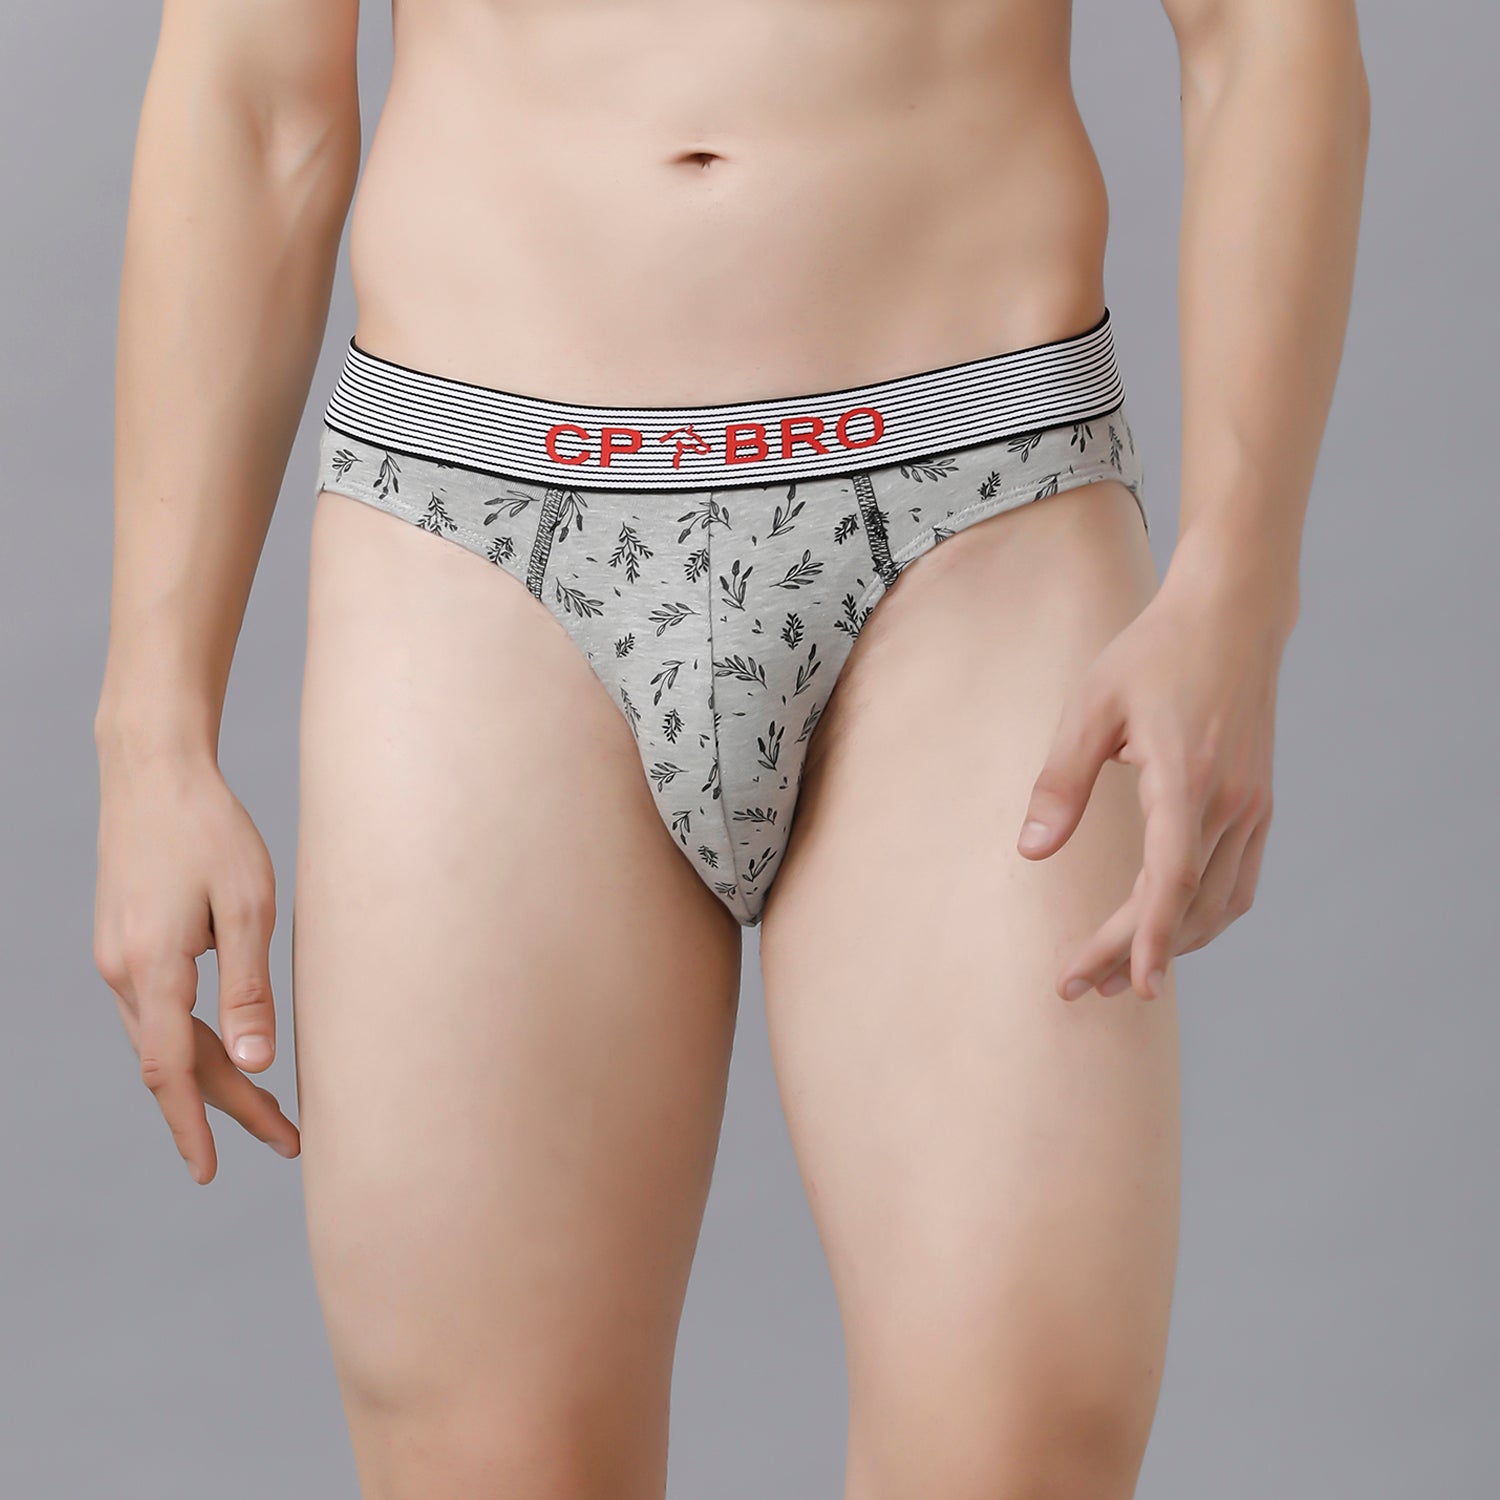 CP BRO Men's Printed Briefs with Exposed Waistband Value Pack - White